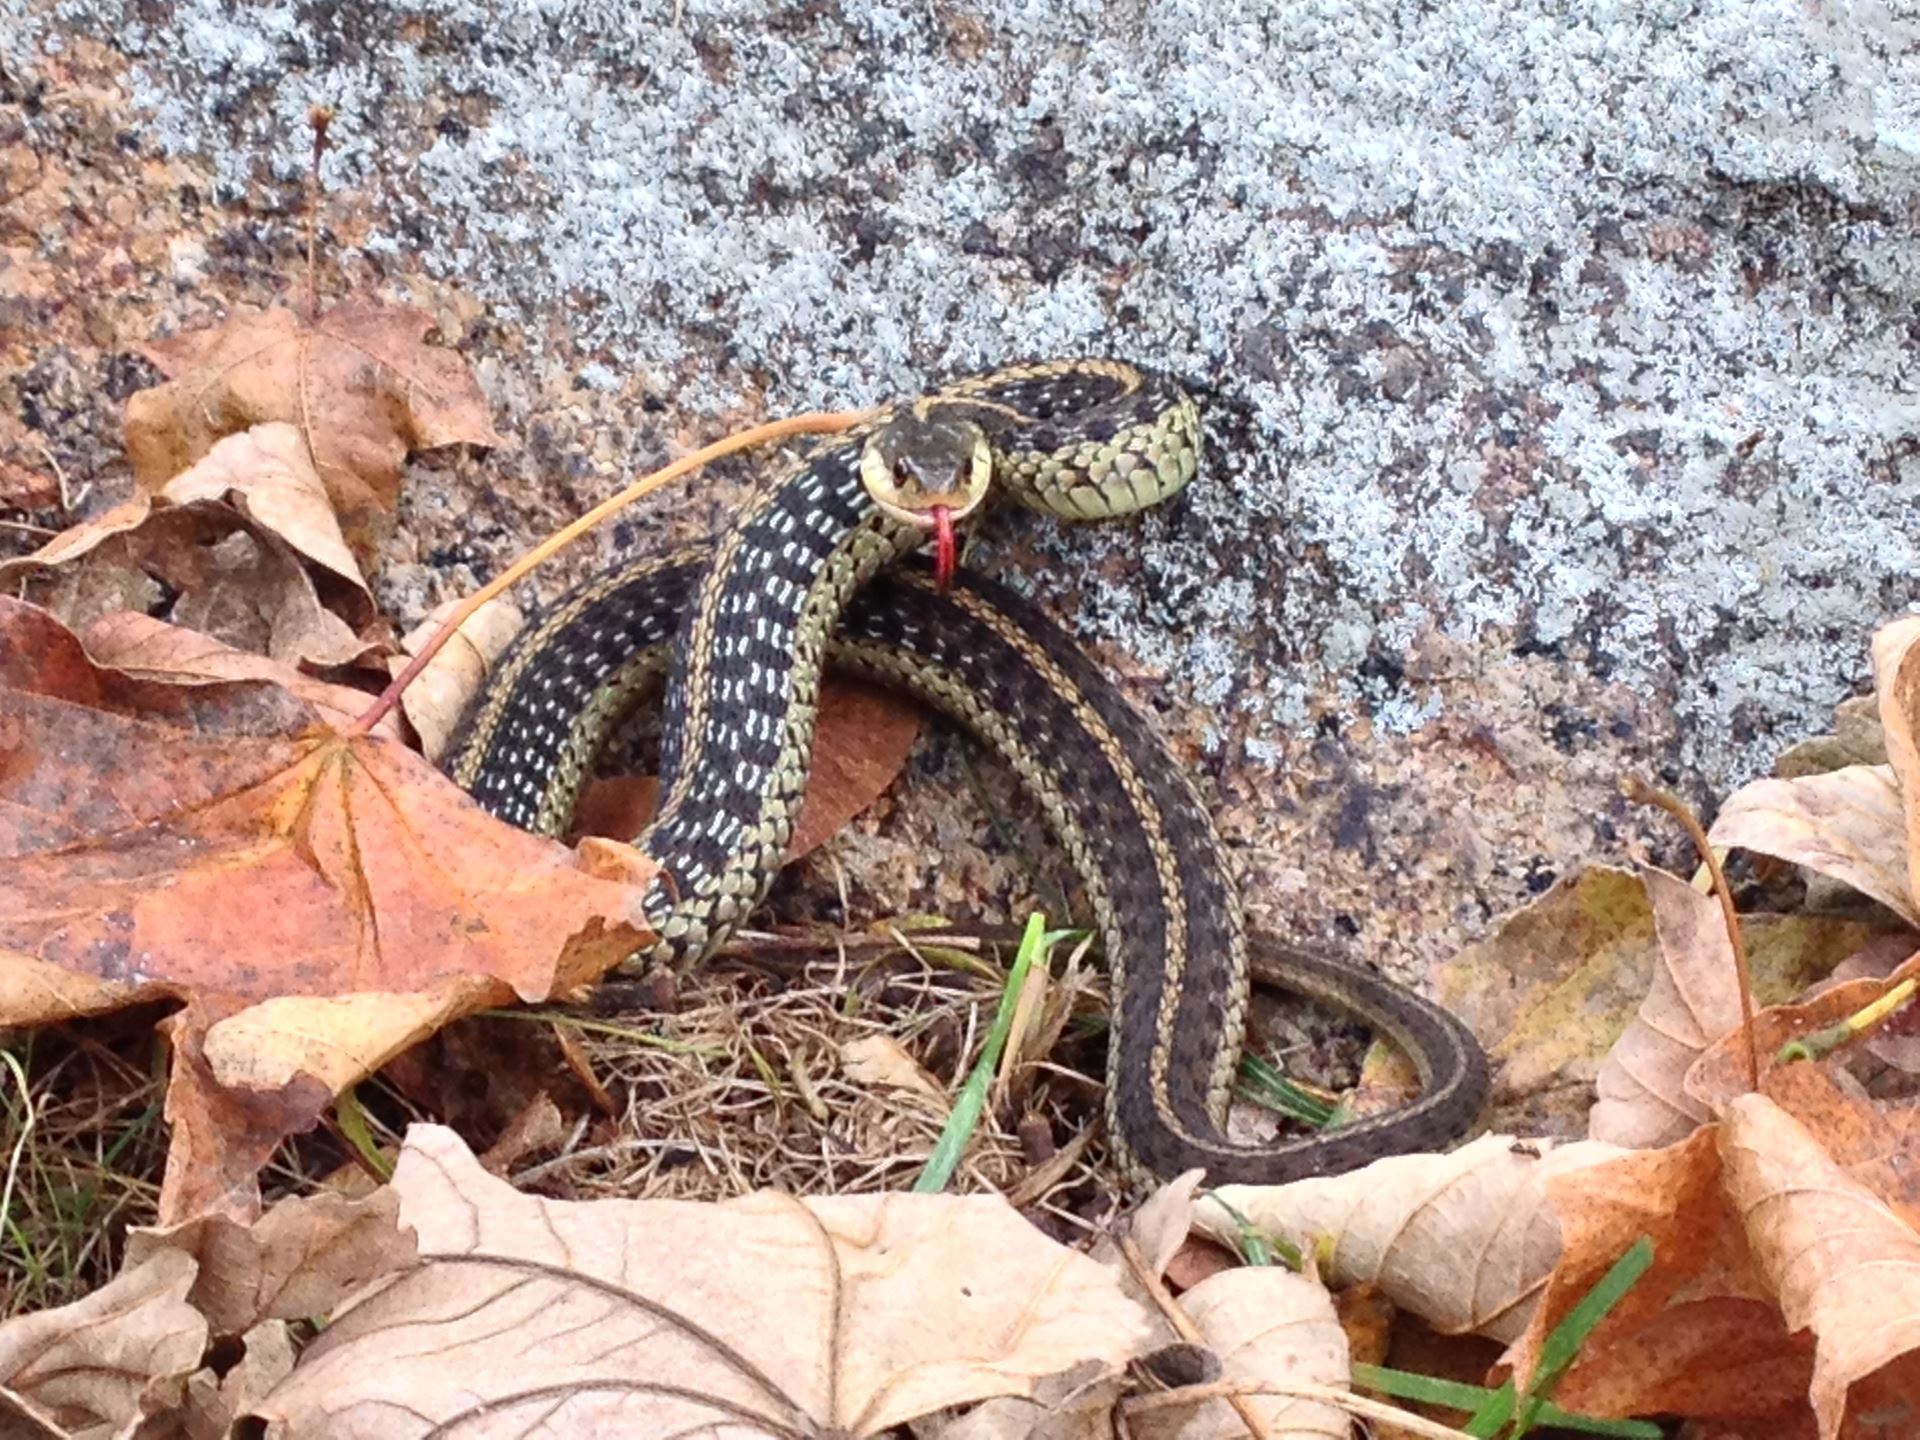 image of garter snake in dead leaves with tongue out